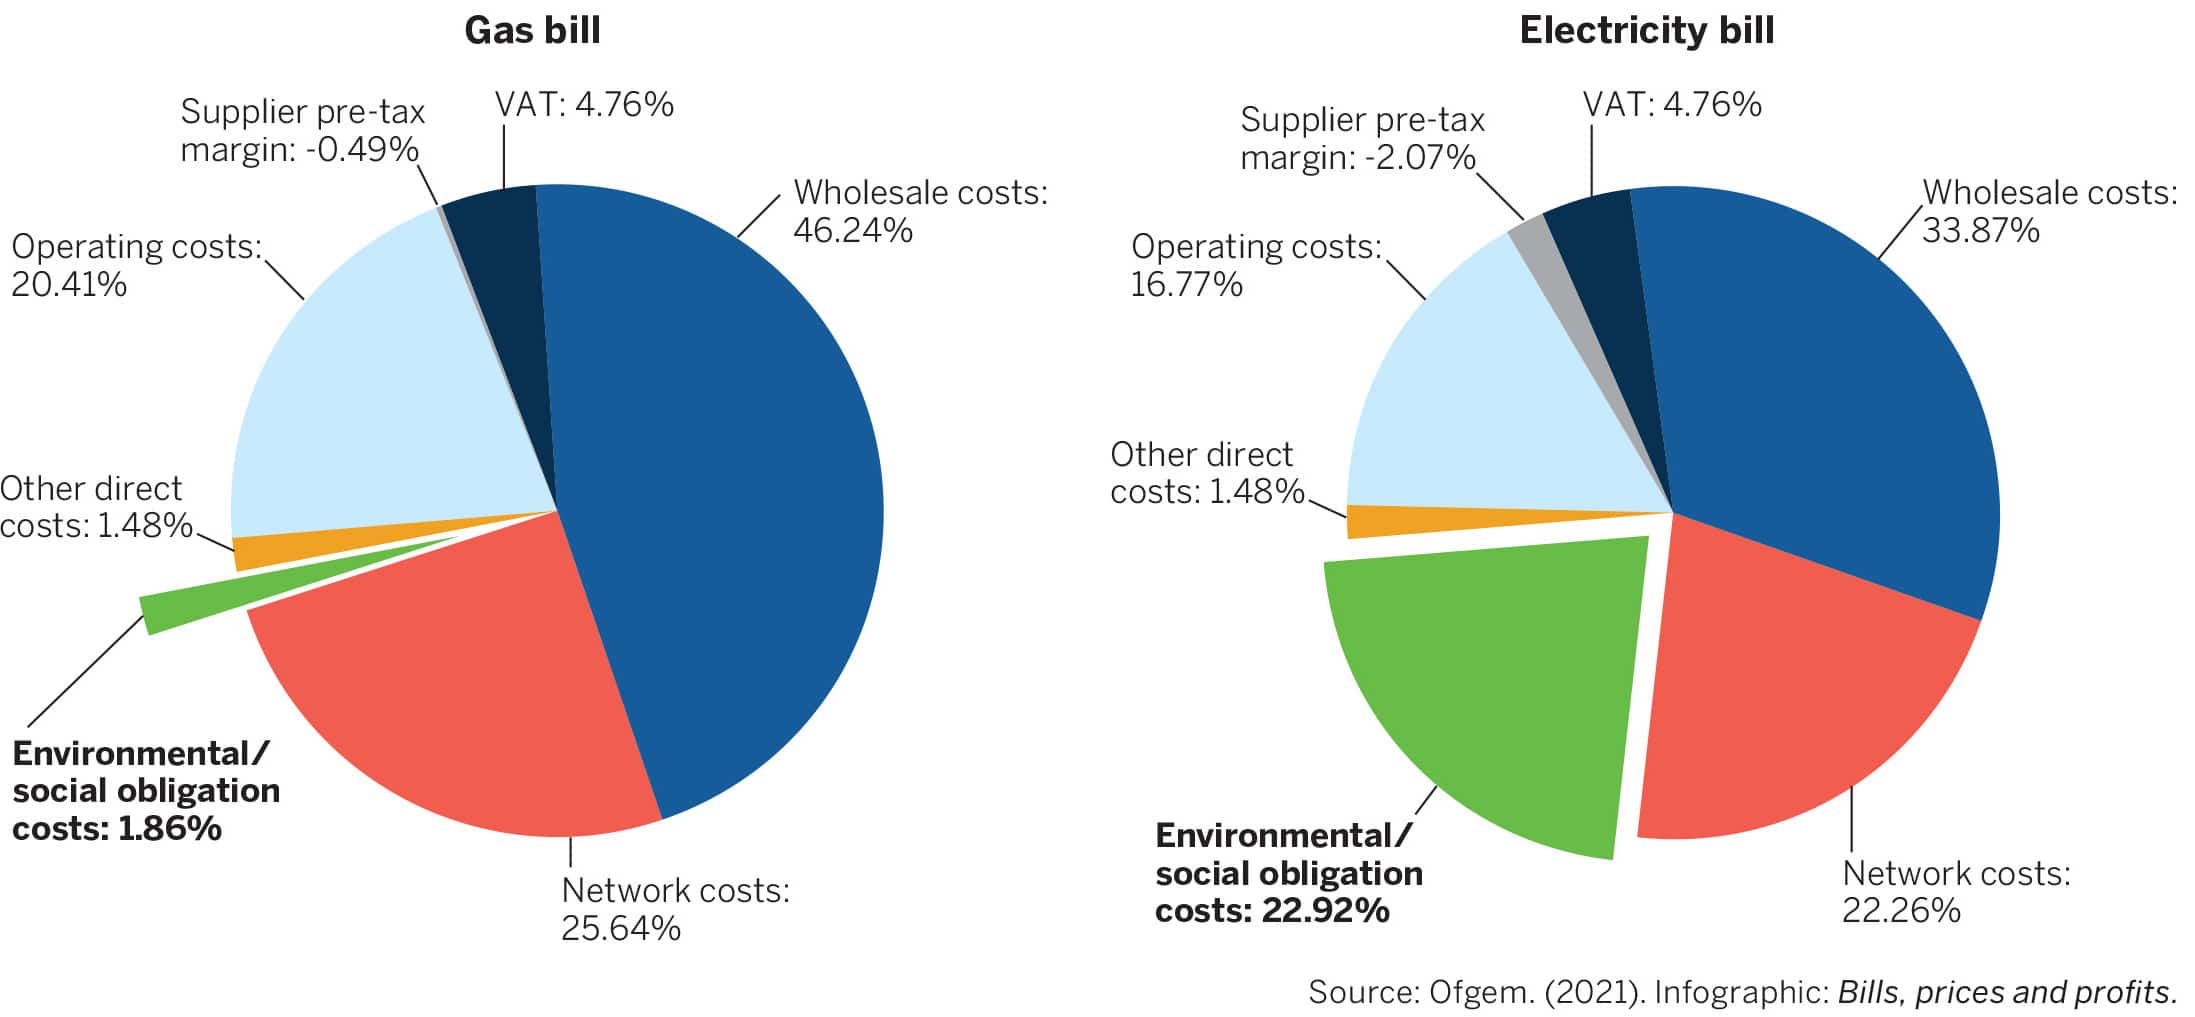 Pie charts comparing cost percentages between gas and electricity bills. The charts show 1.86 percent environmental and social obligation costs for gas bills compared to 22.92 percent for electric bills.